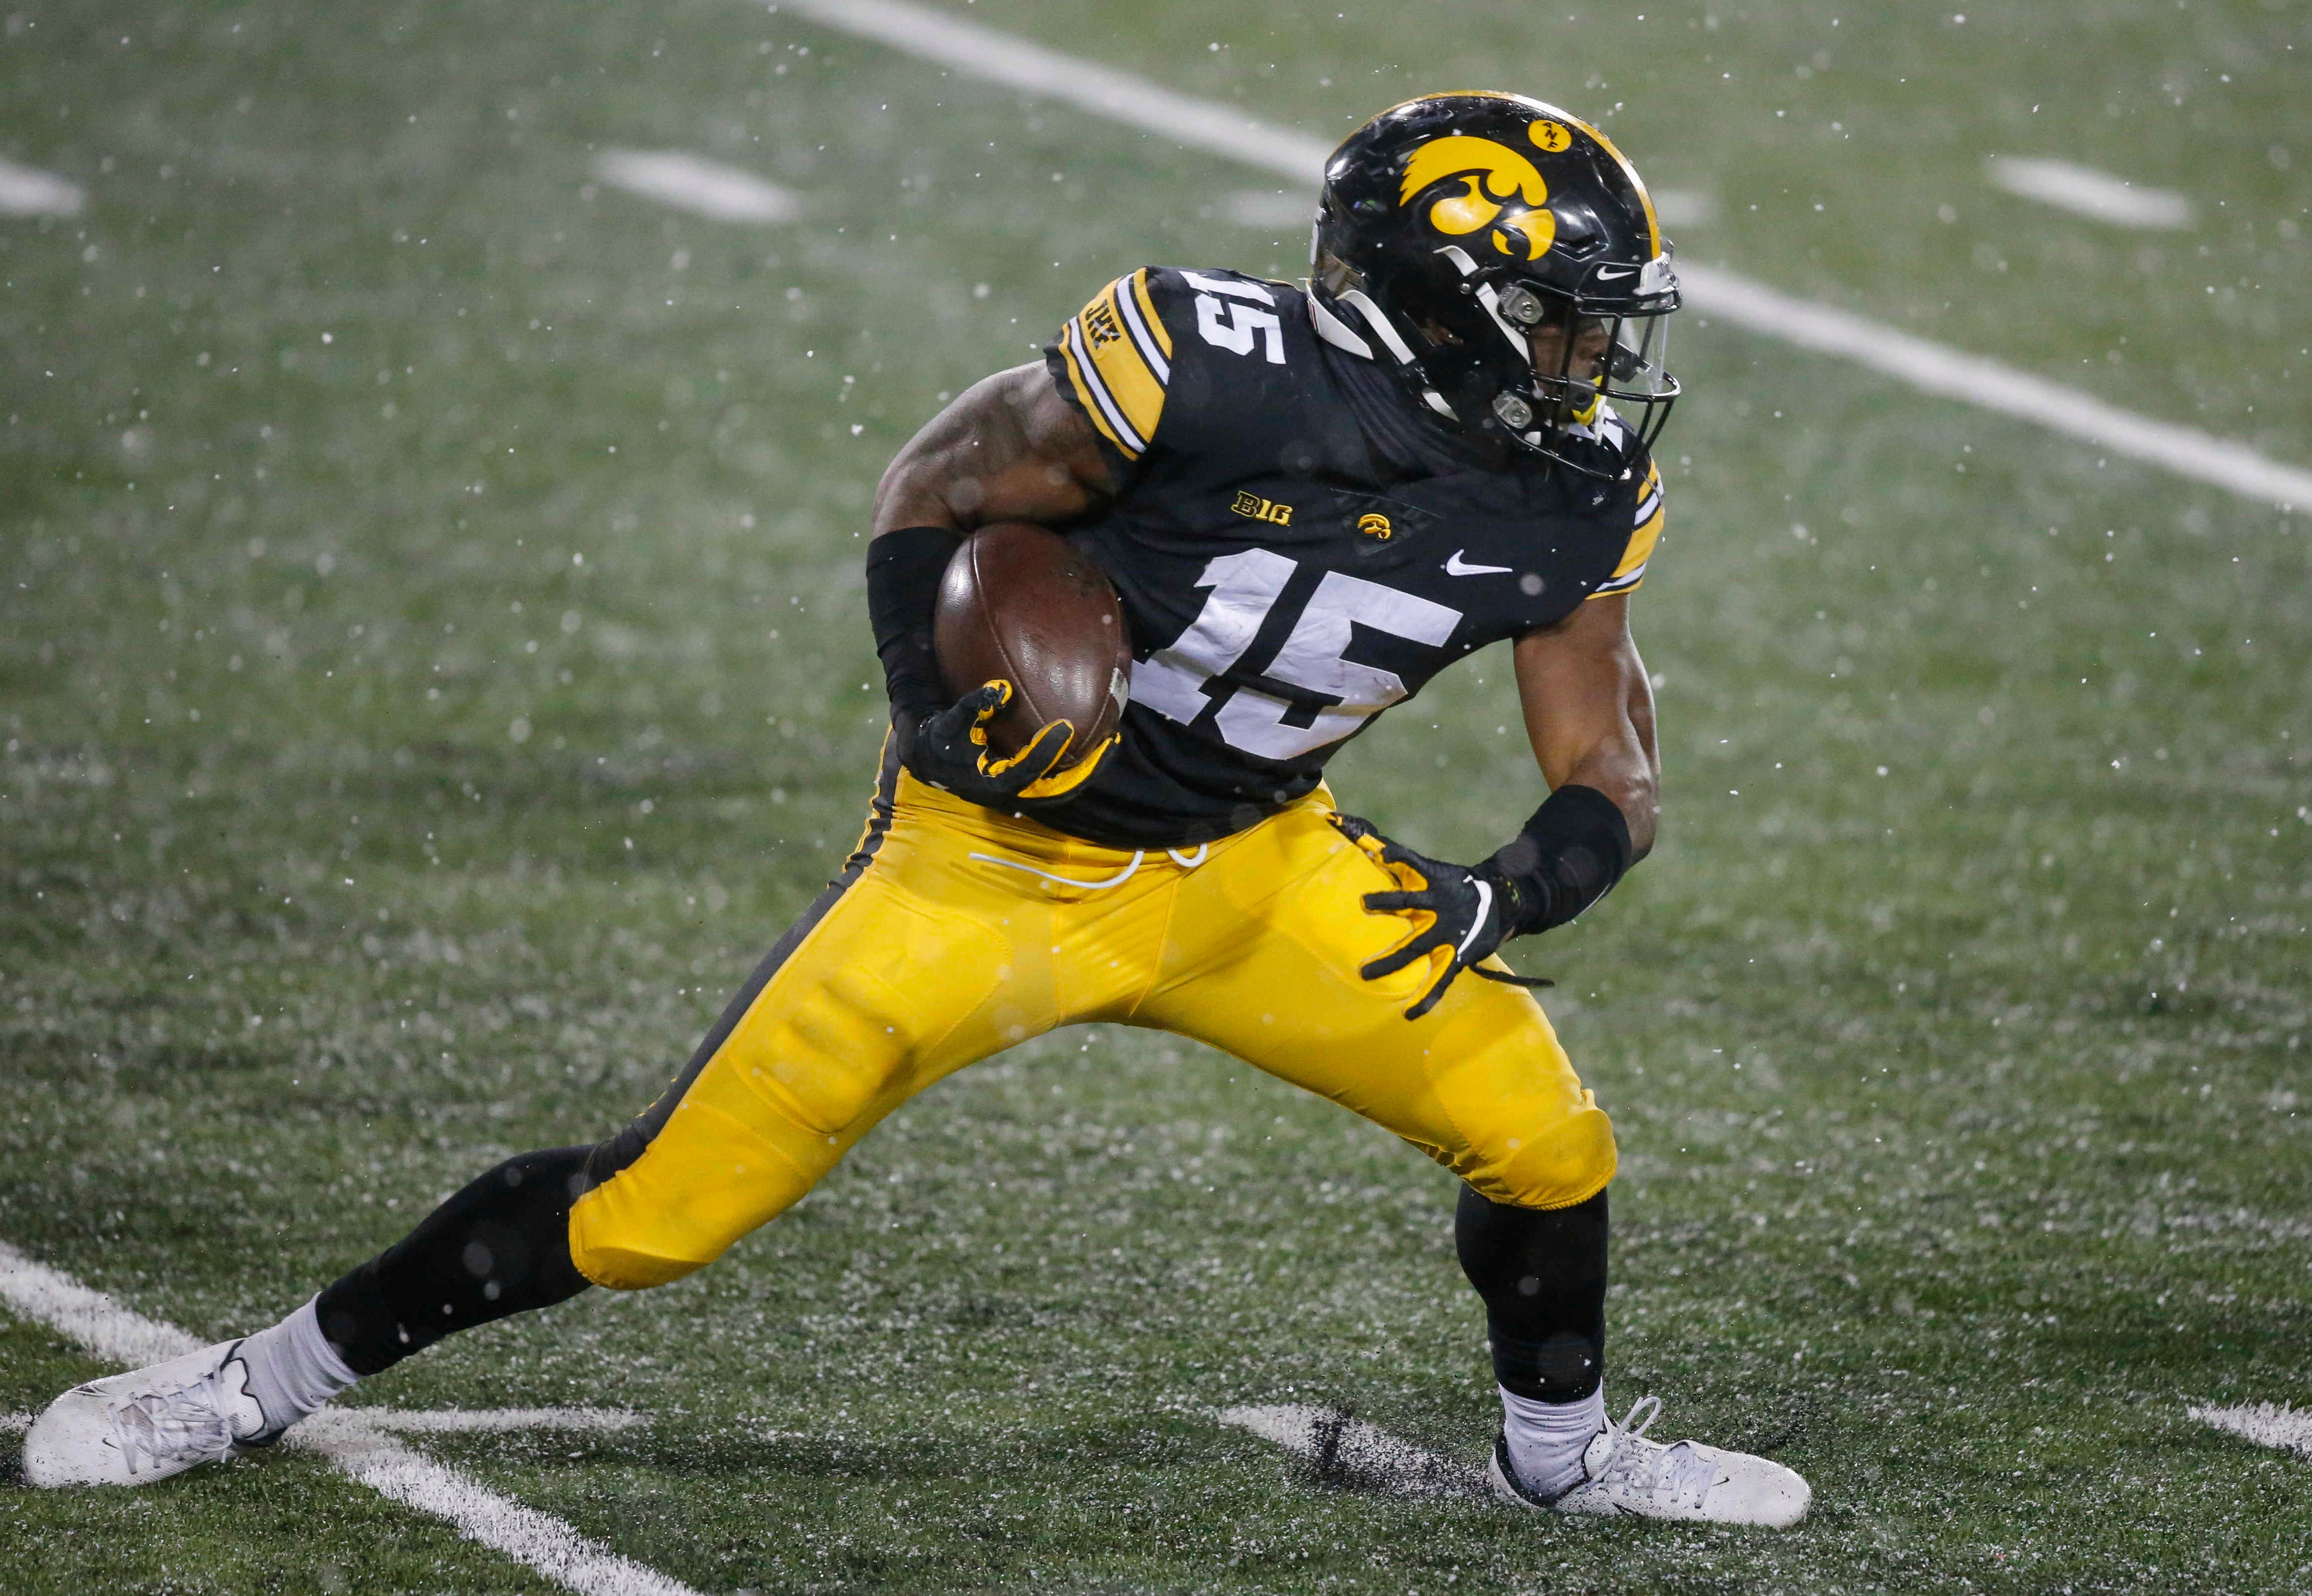 Iowa sophomore running back Tyler Goodson runs for a touchdown in the fourth quarter against Wisconsin on Saturday, Dec. 12, 2020, at Kinnick Stadium in Iowa City, Iowa.